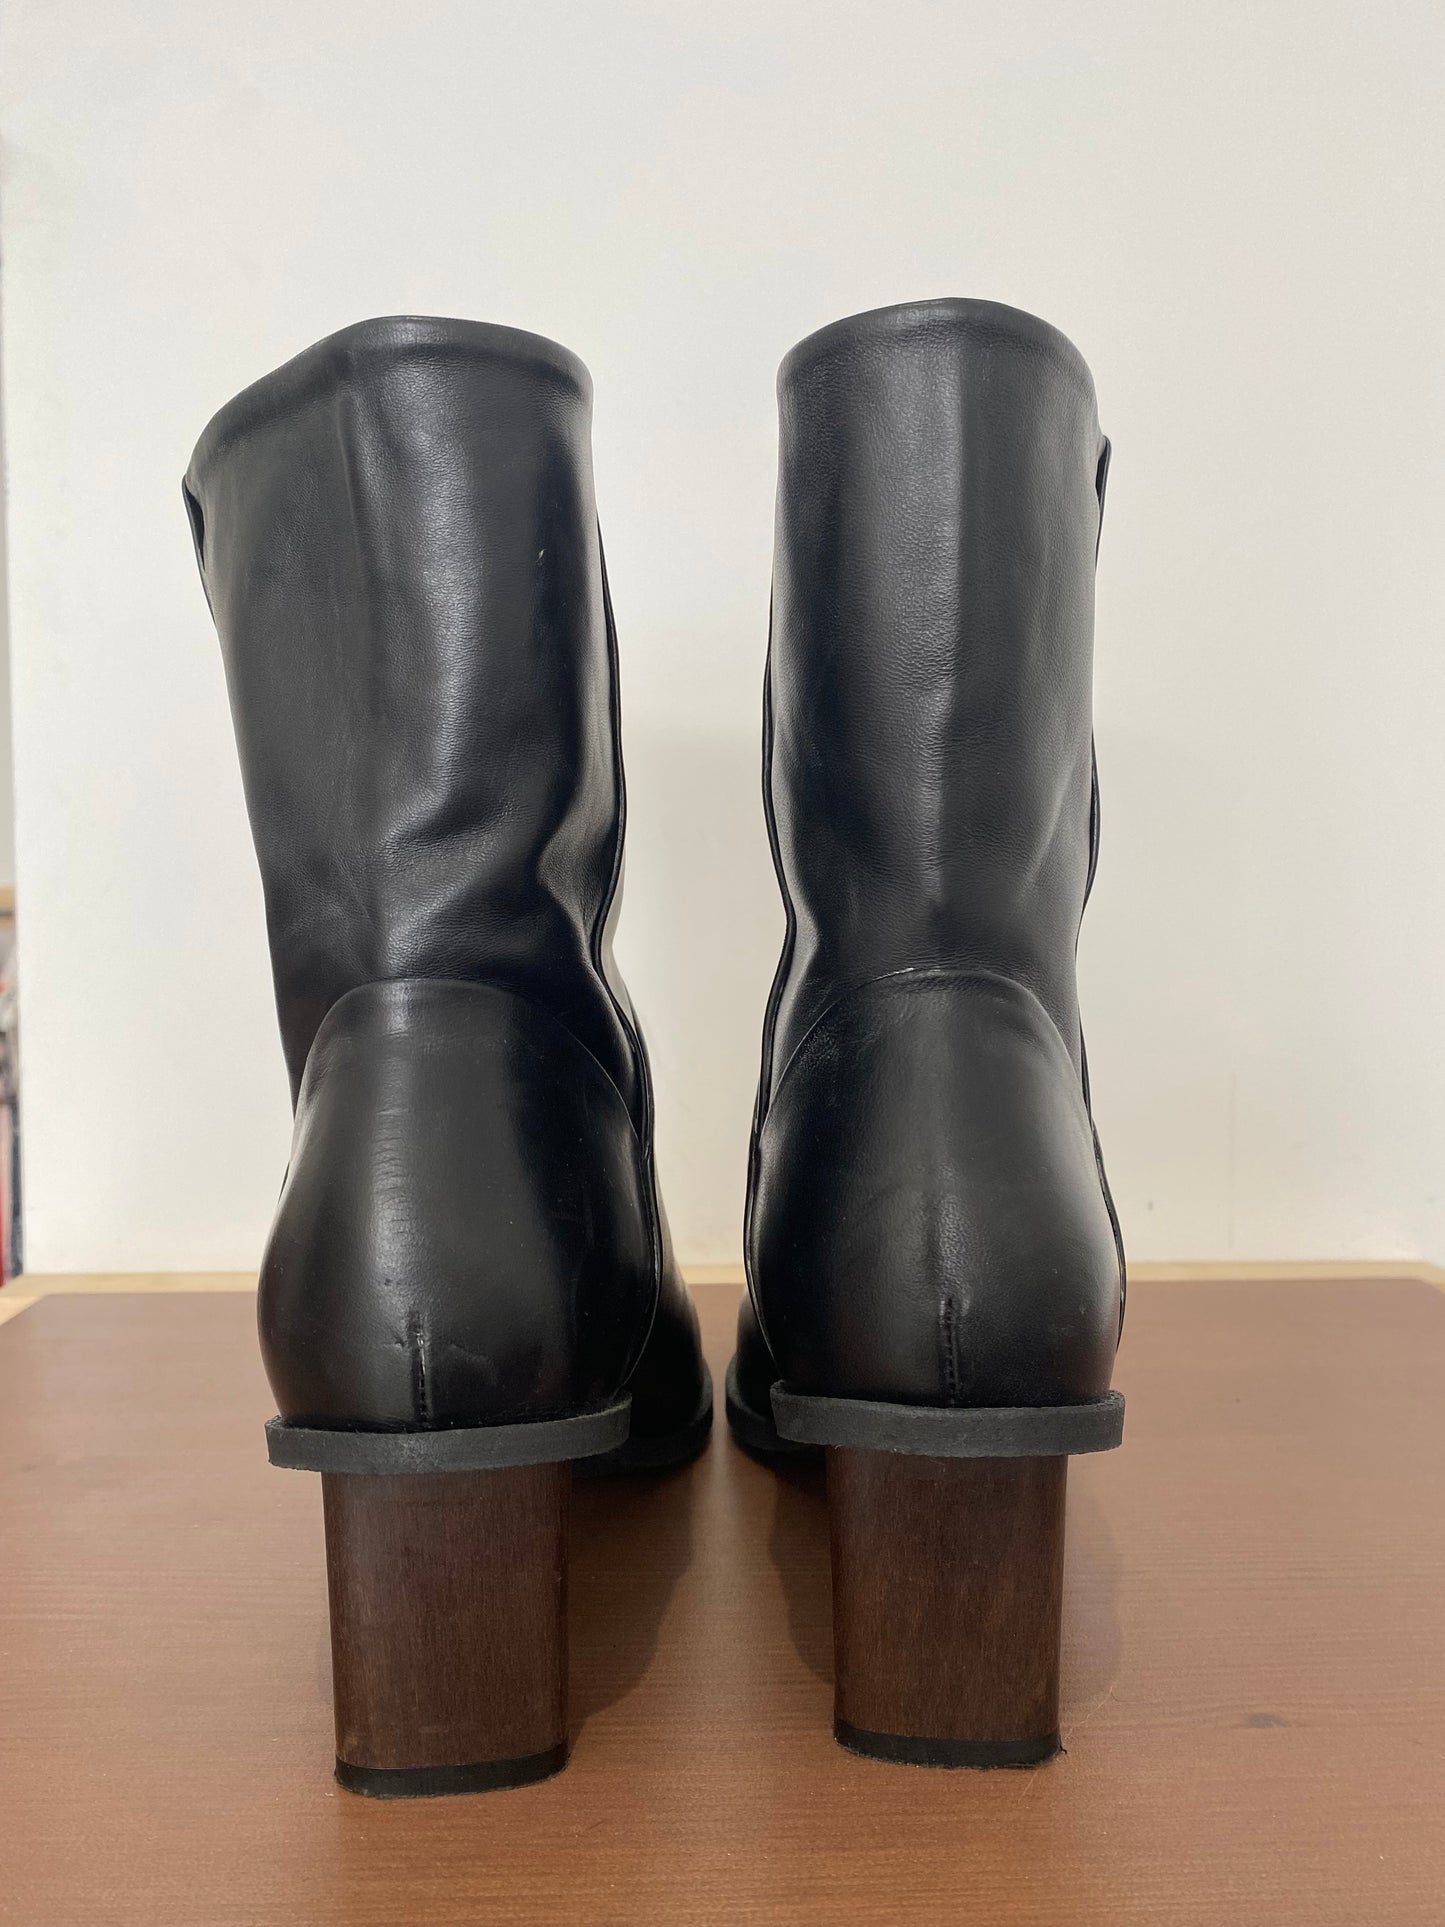 COS Black Leather Calf Length Boots Size 5